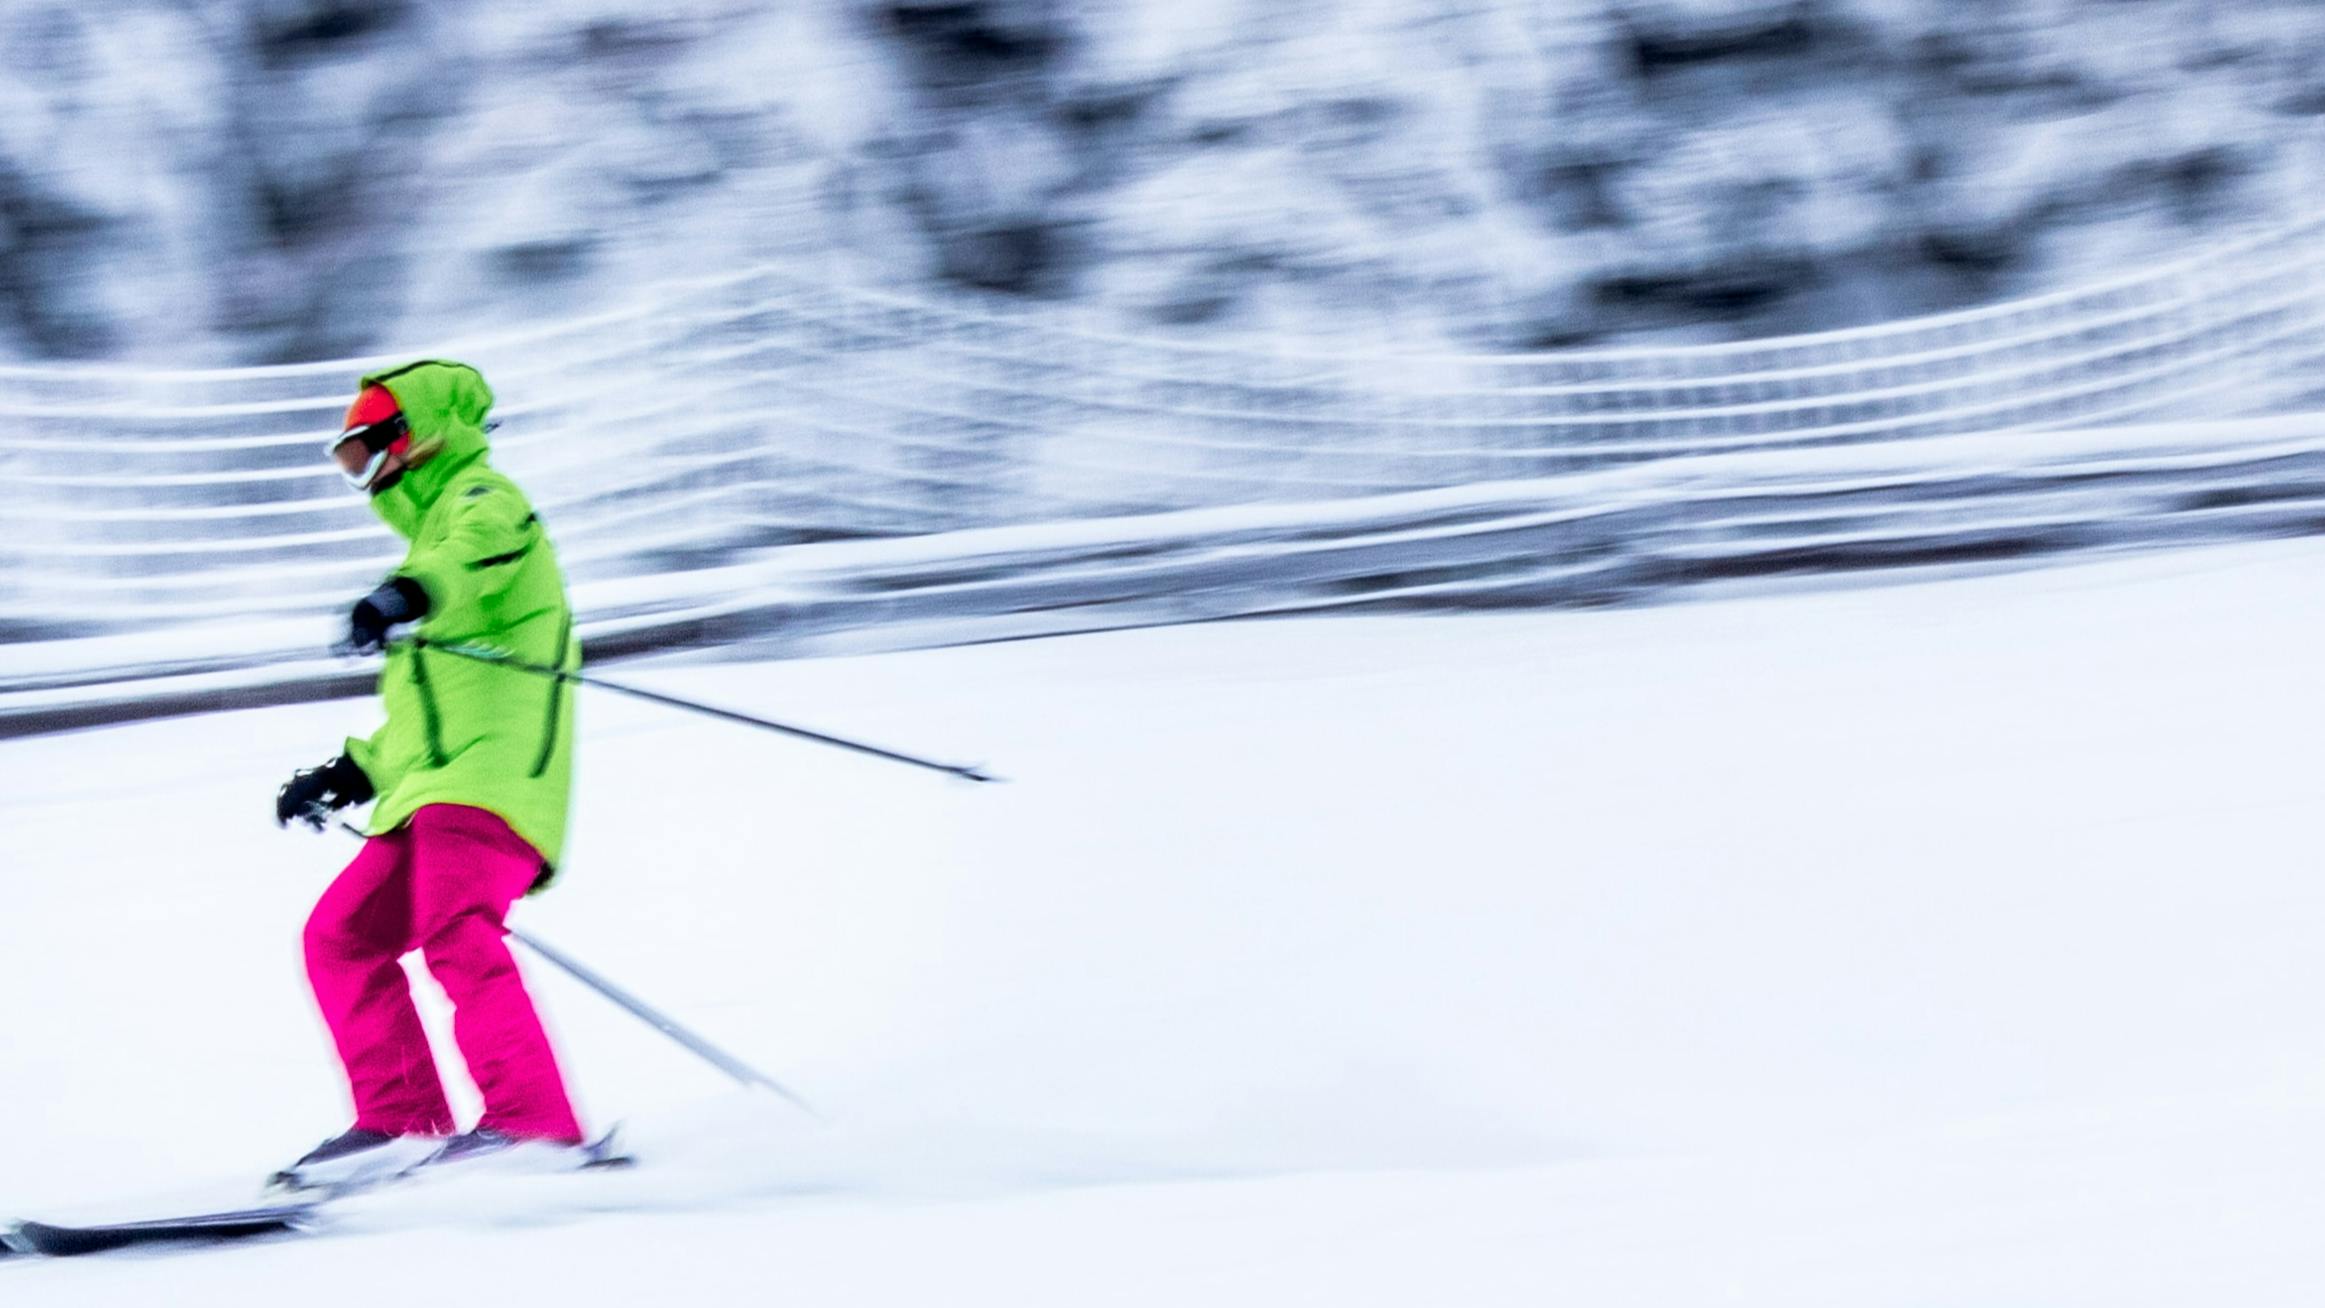 Skier zooming down the frosty white slope in a neon green jacket and hot pink ski pants.